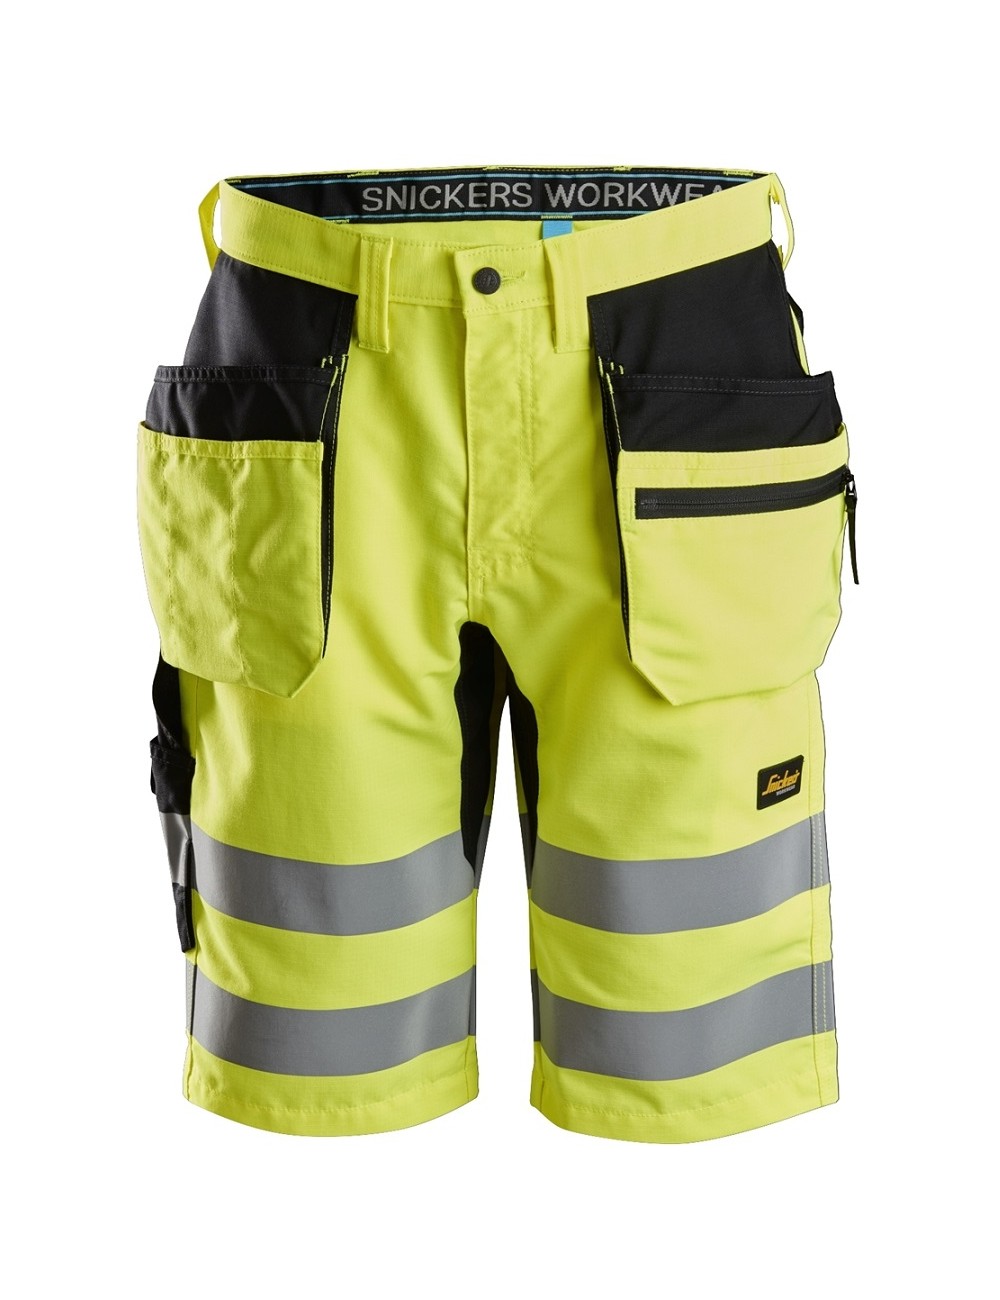 Snickers 6131 work shorts